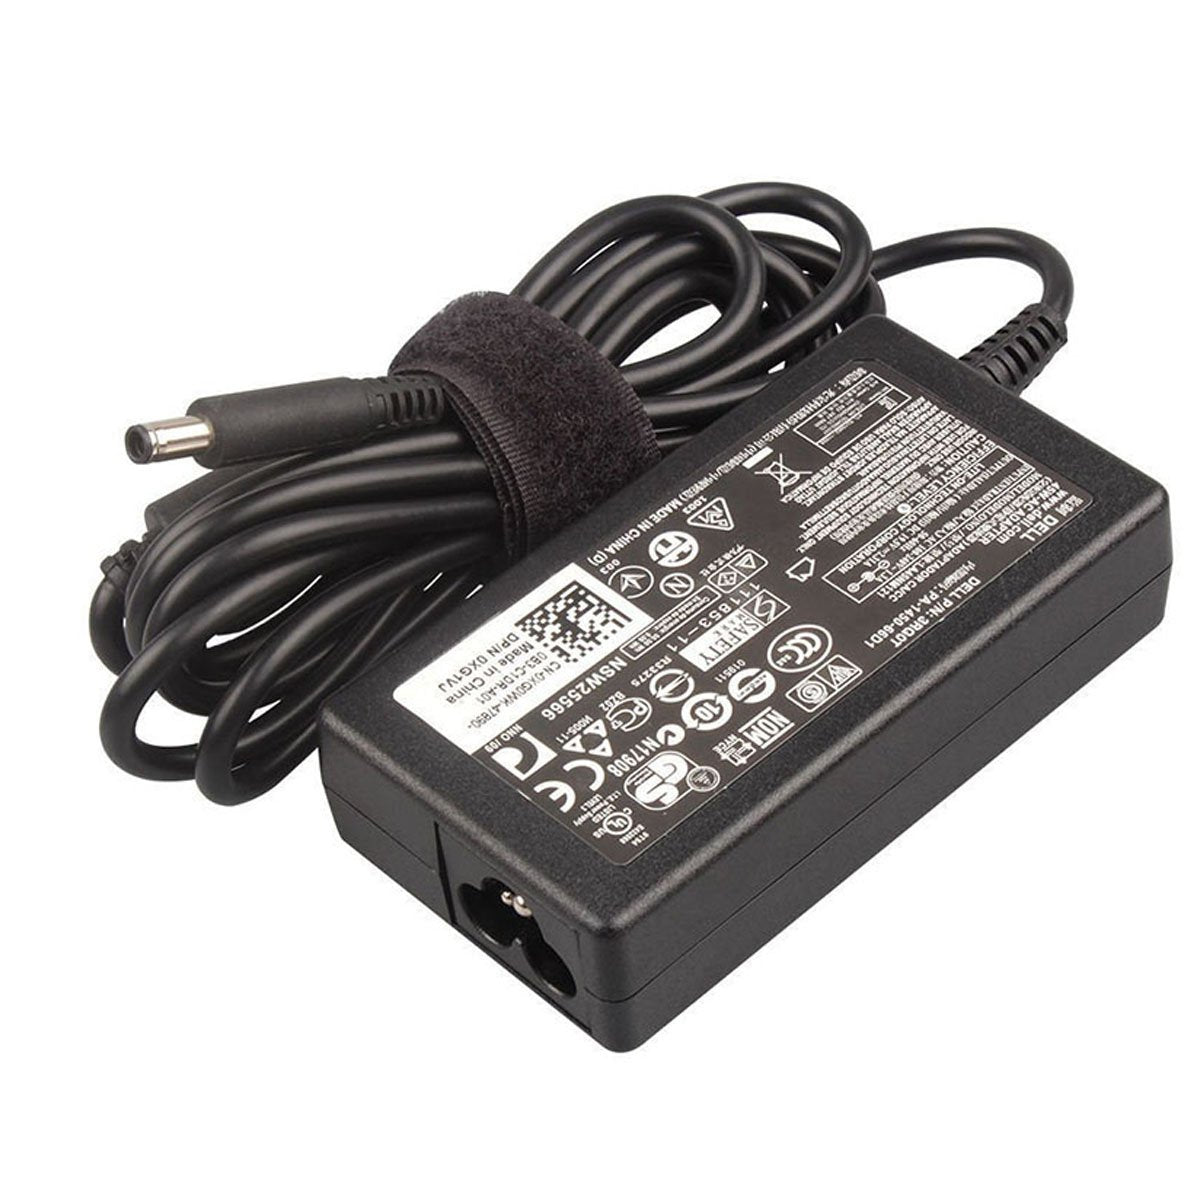 Dell Inspiron 15 3558 Original 45W Laptop Charger Adapter With Power Cord 19.5V 4.5mm Pin